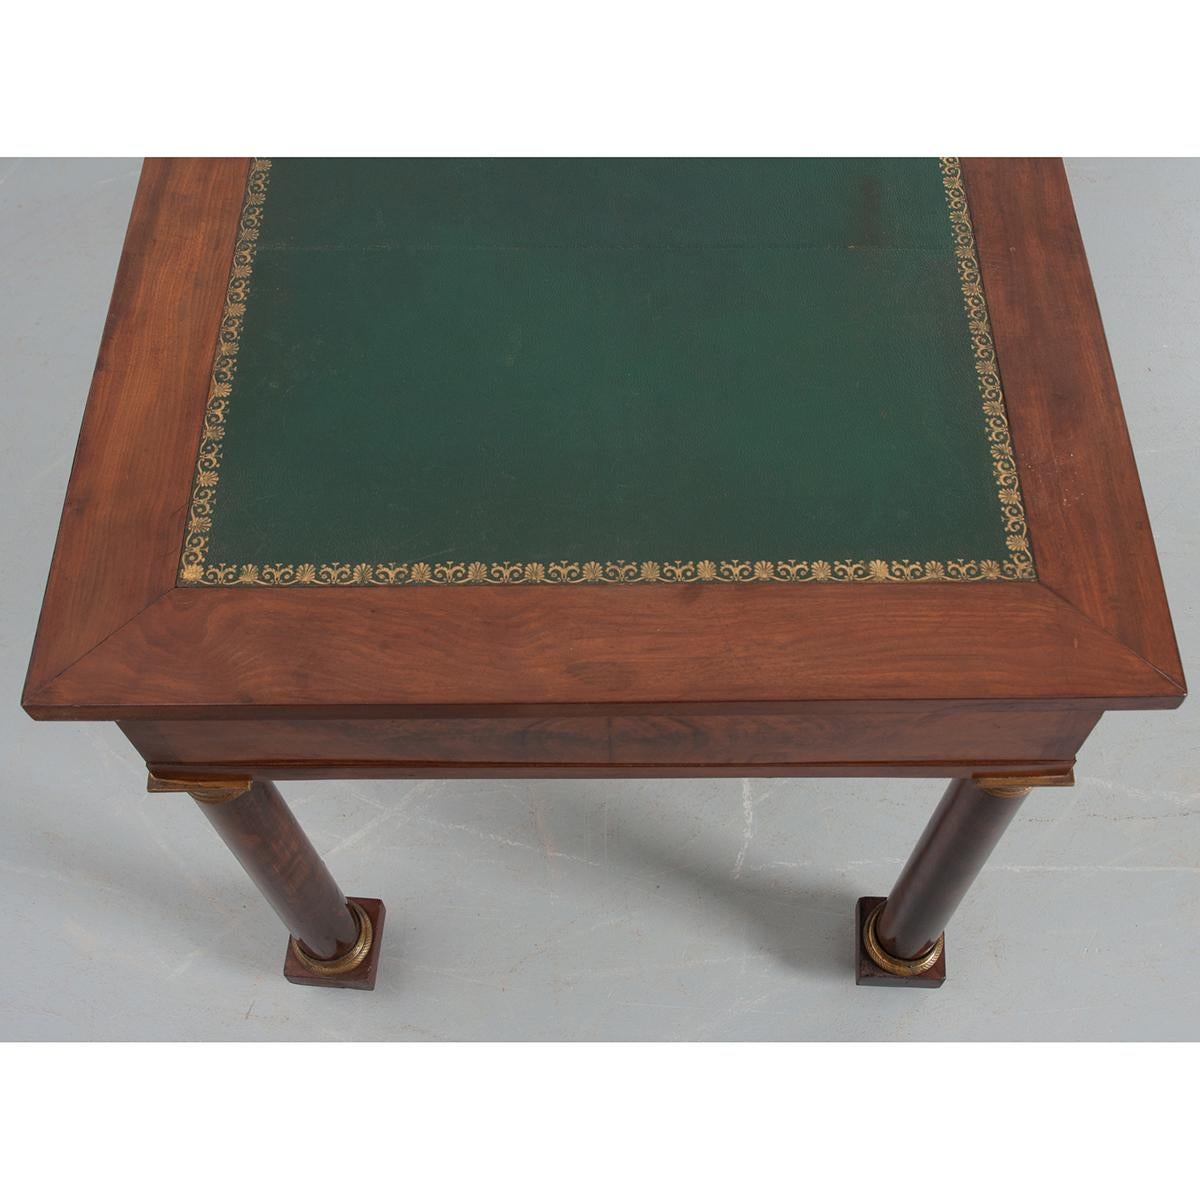 A stately Empire bureau plat with a tooled leather top, c. 1830. The three-piece green leather top has a beautiful gold tooled filigree border and is framed in mahogany. You will find three drawers in the apron; two smaller drawers with brass knobs